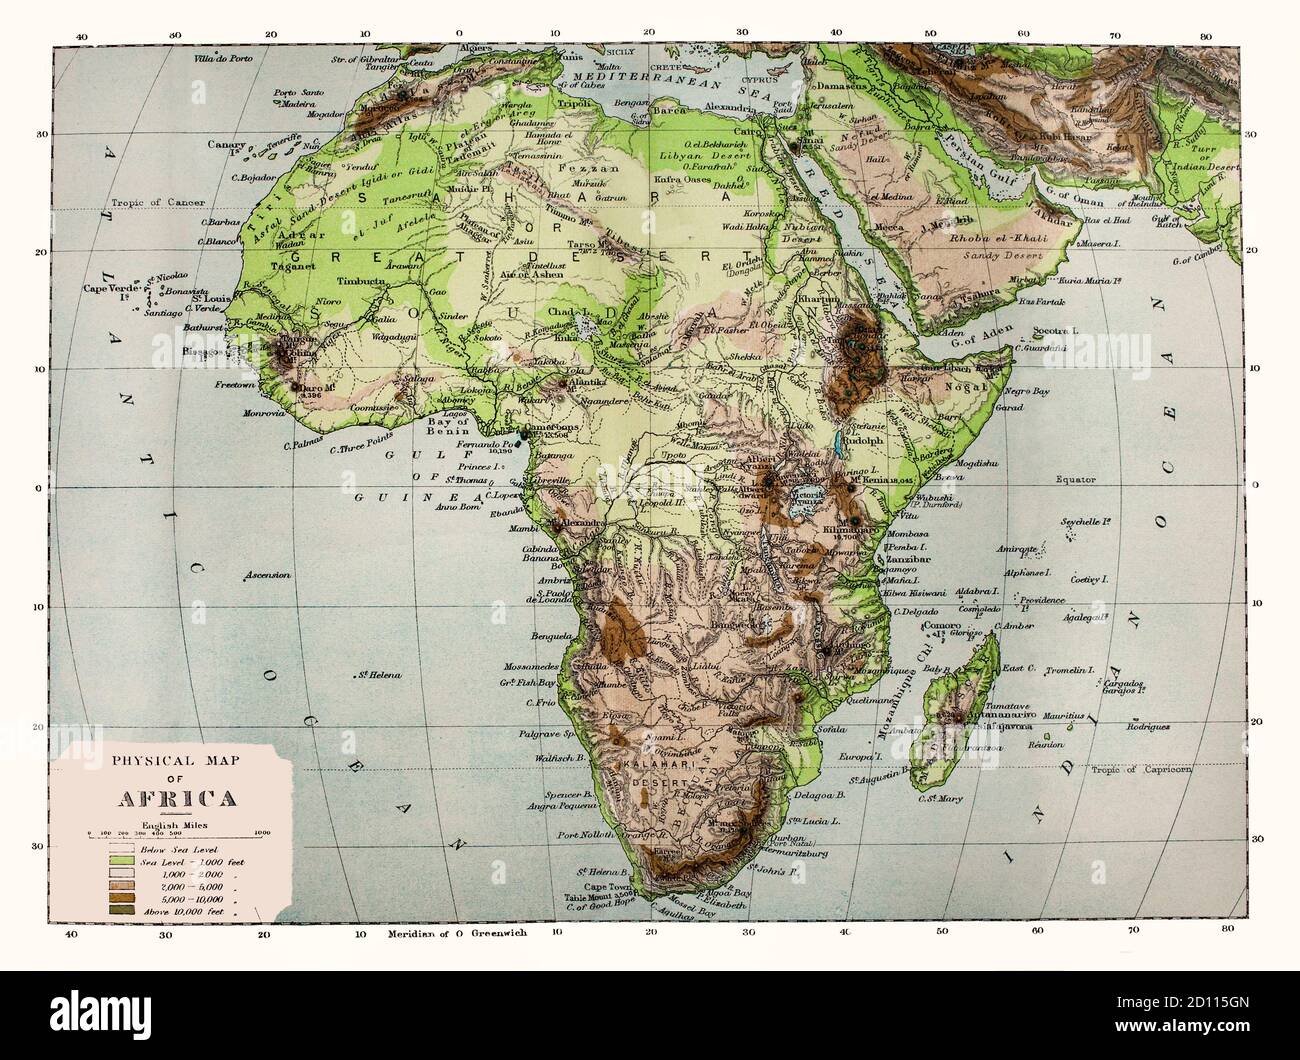 A late 19th Century physical map of Africa, note the names of some locations are no longer in use. Geologically, Africa includes the Arabian Peninsula; the Zagros Mountains of Iran and the Anatolian Plateau of Turkey mark where the African Plate collided with Eurasia. The Afrotropical realm and the Saharo-Arabian desert to its north unite the region biogeographically, and the Afro-Asiatic language family unites the north linguistically. Stock Photo